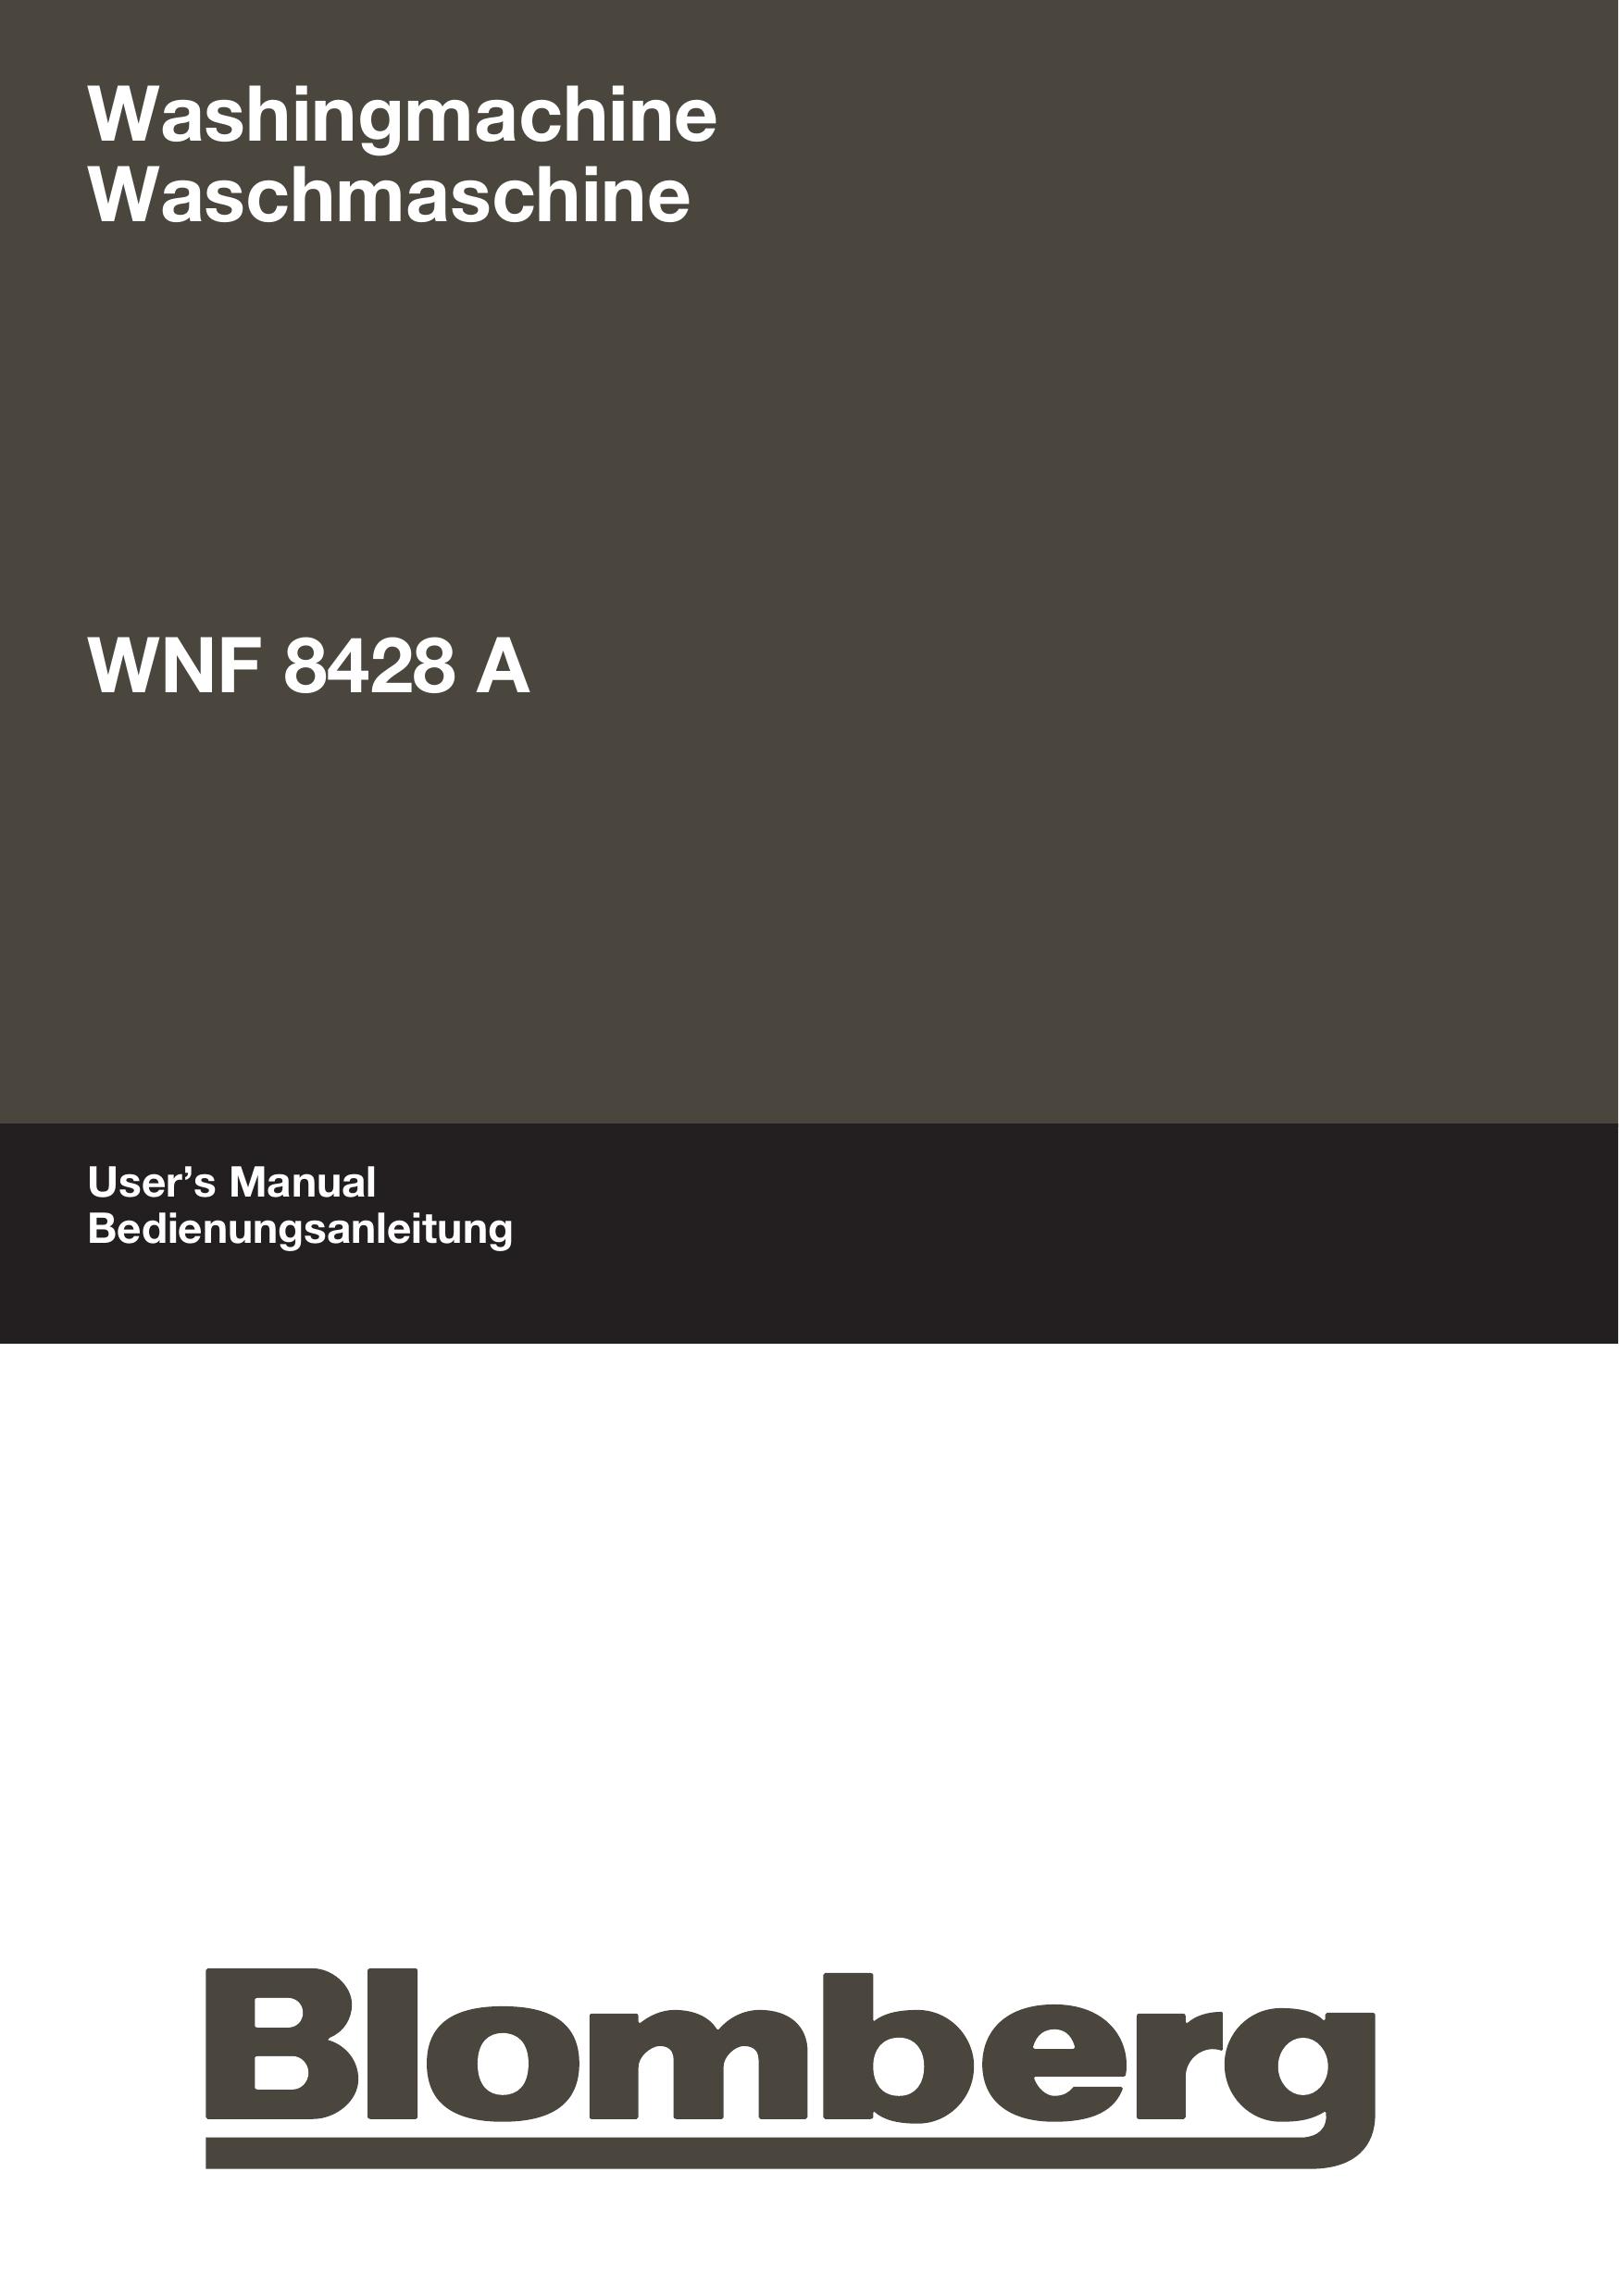 Blomberg WMF 8428 A Washer User Manual